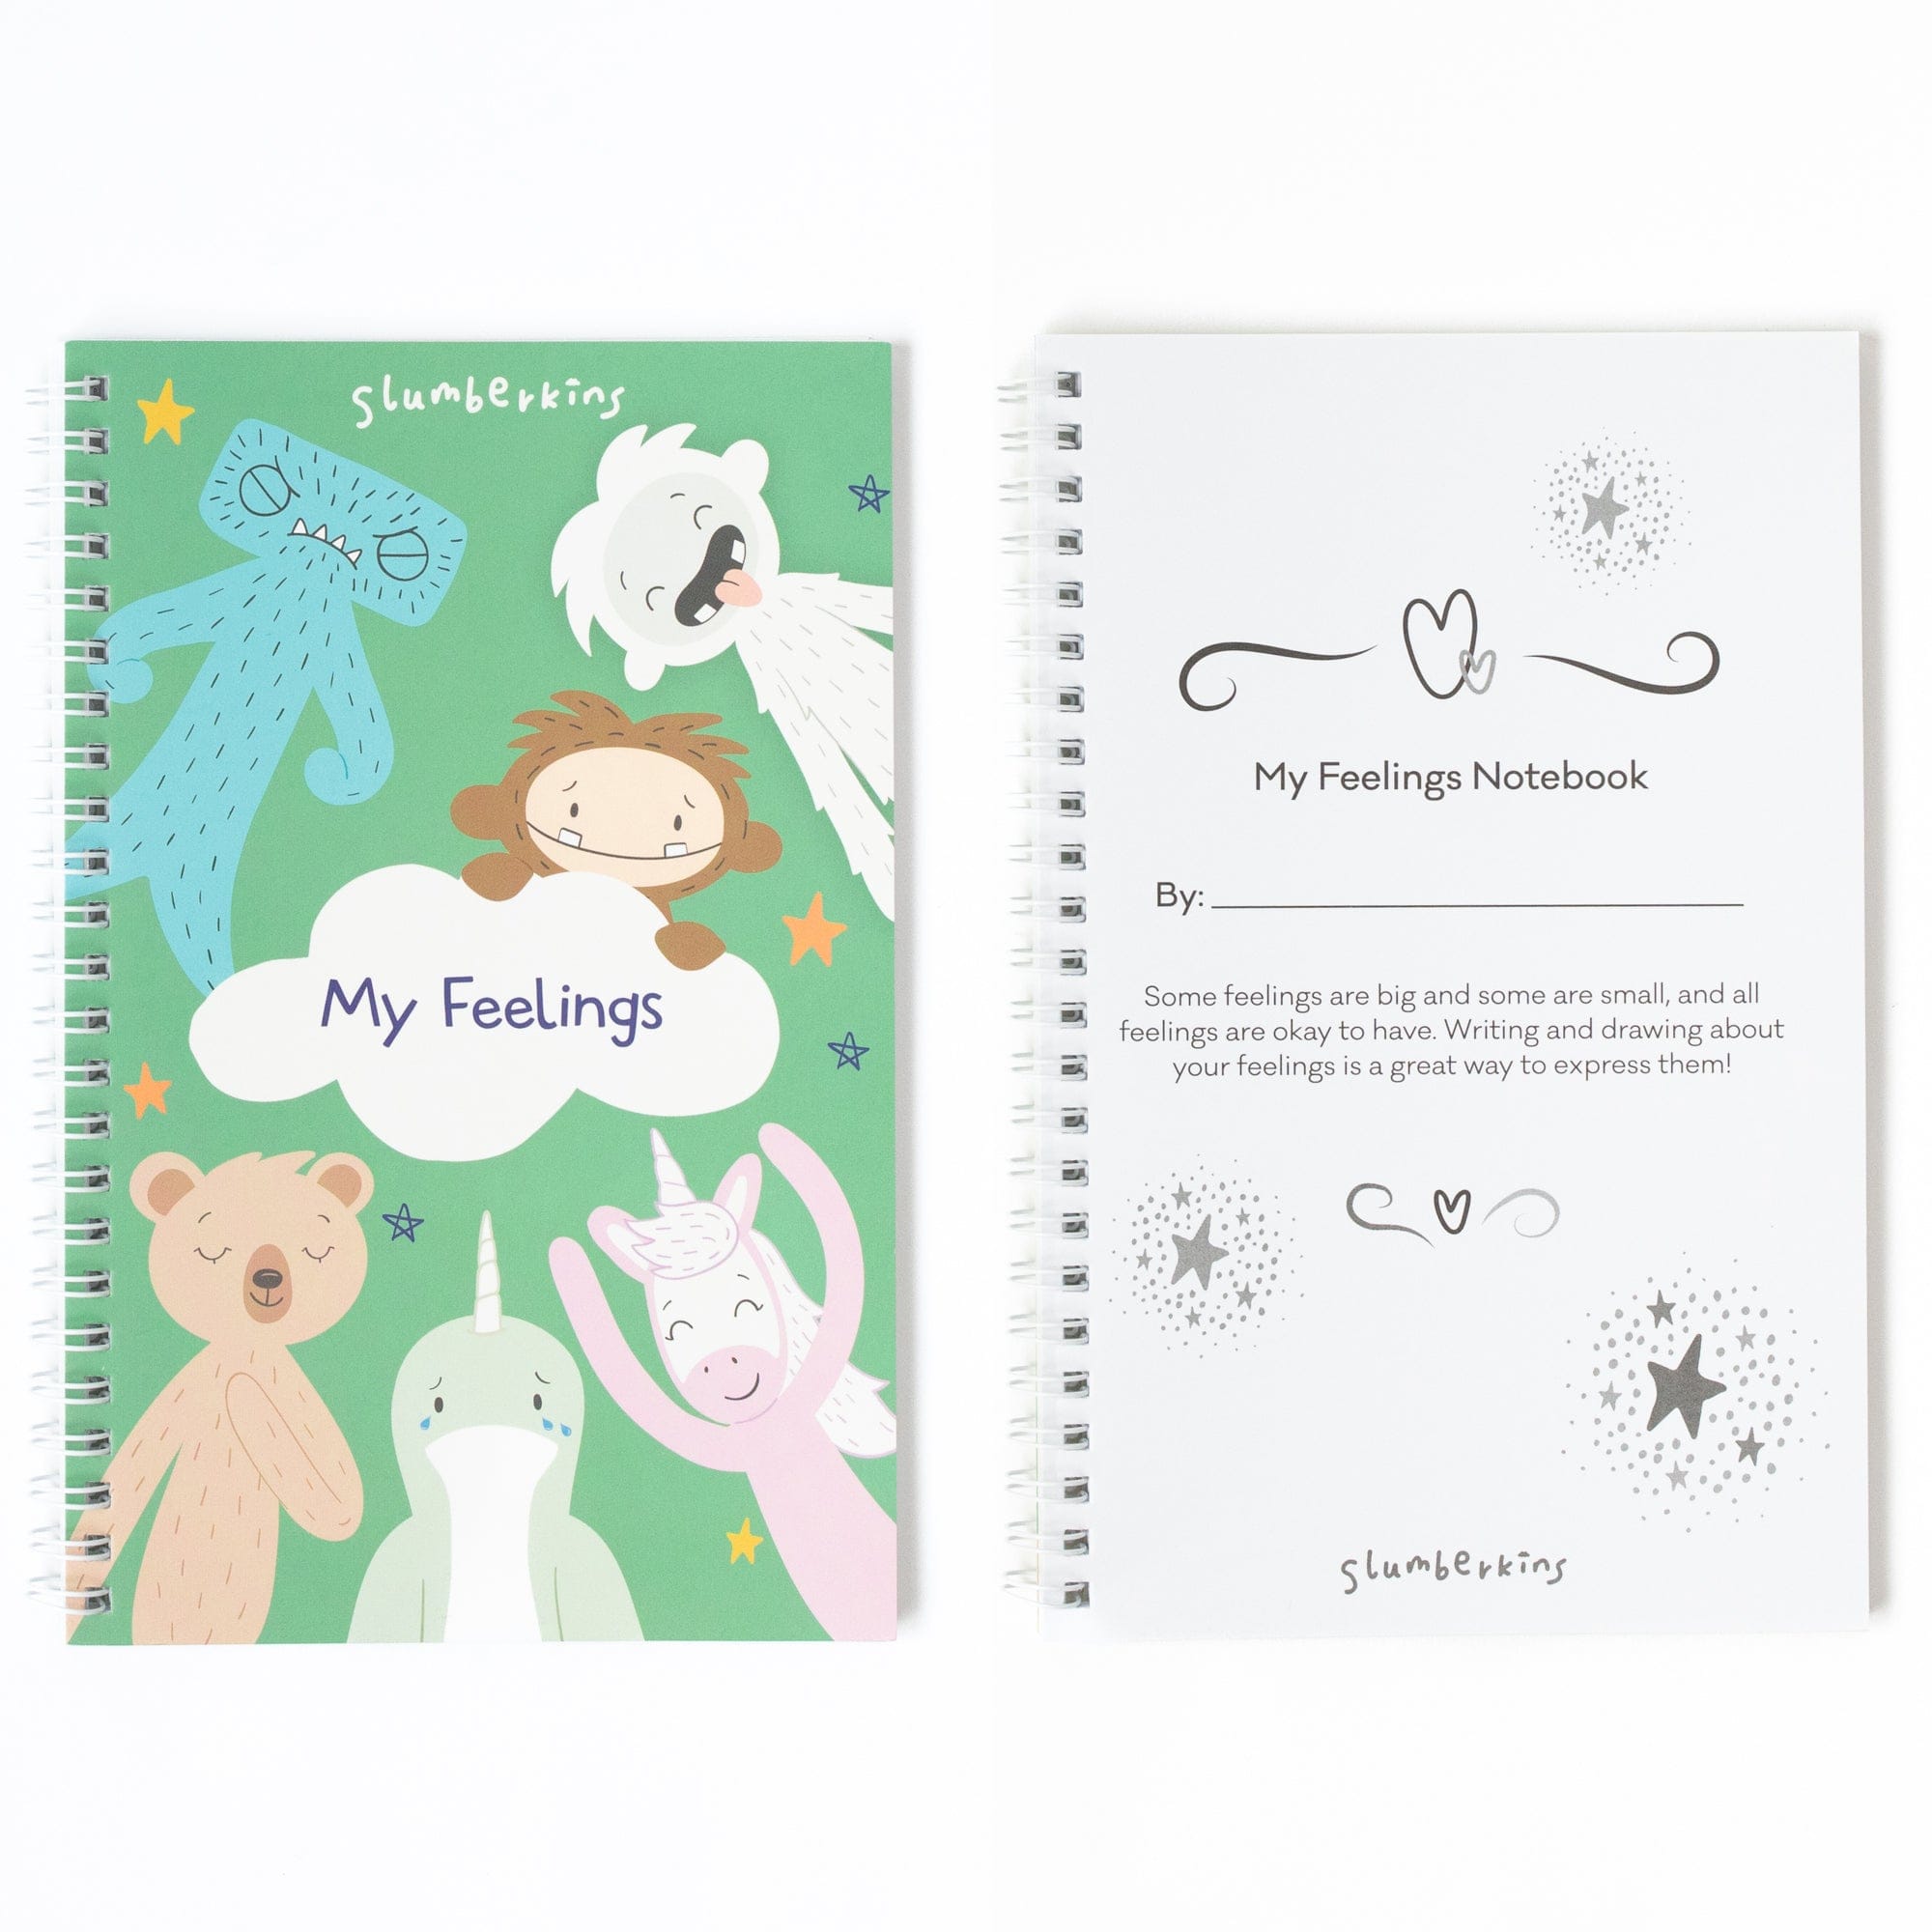 BiblioLifestyle - Journaling Books & Notebooks To Spark Your